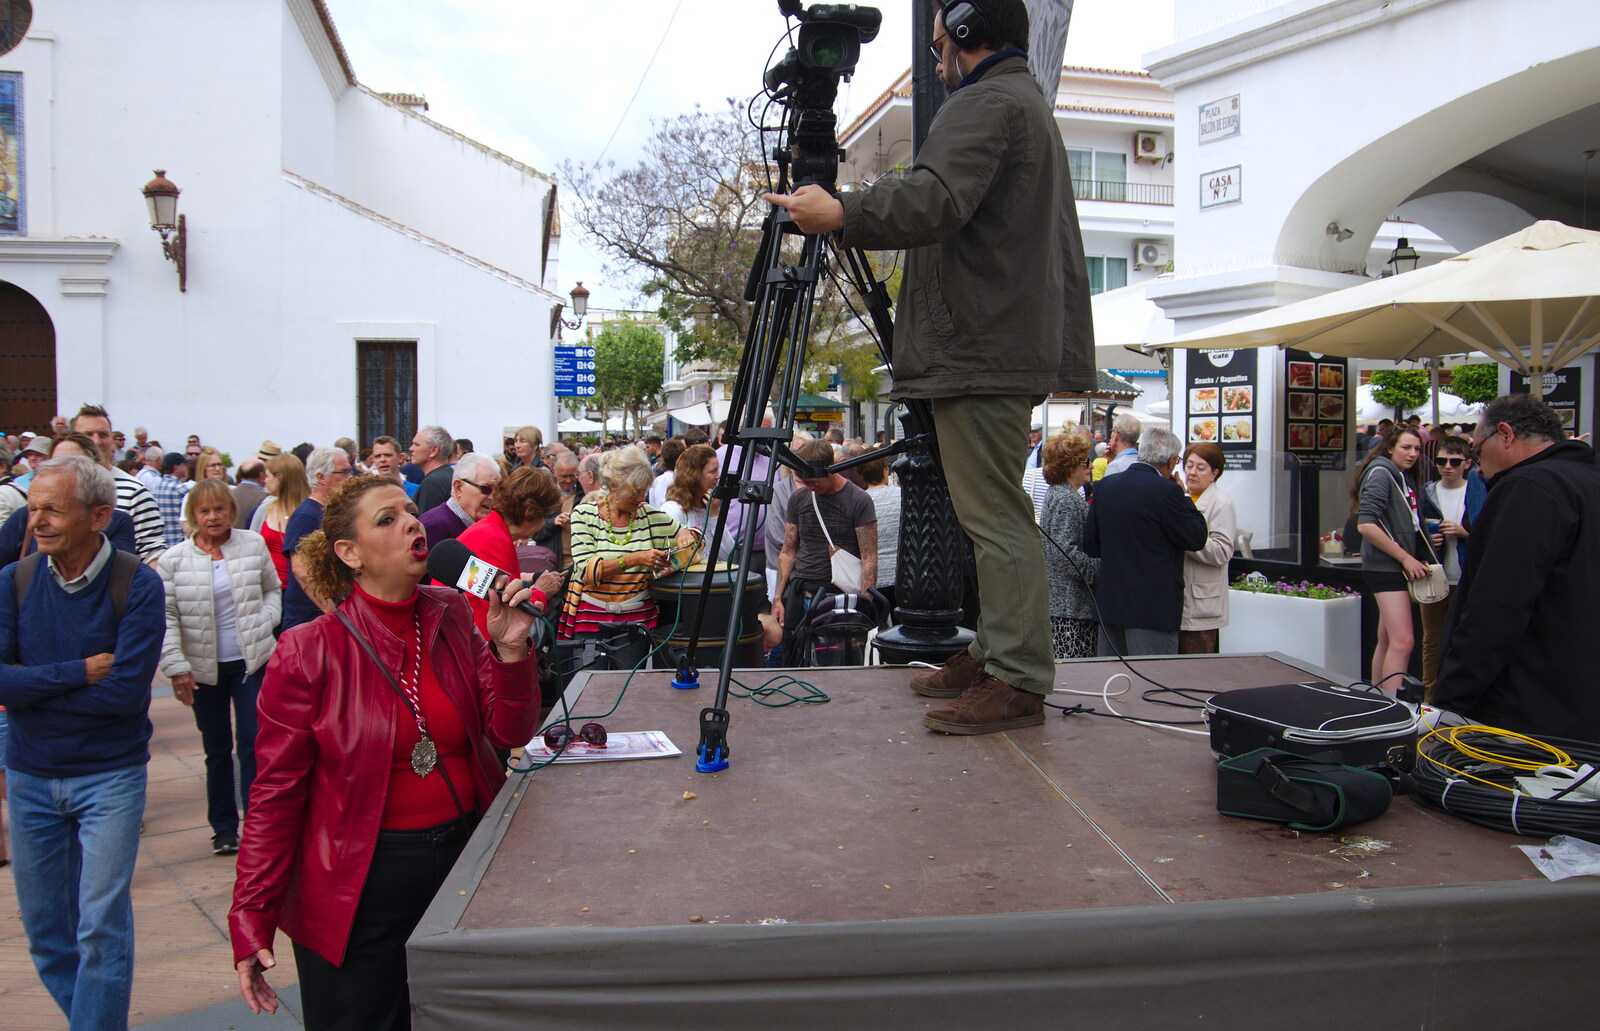 A TV presenter does her thing from An Easter Parade, Nerja, Andalusia, Spain - 21st April 2019